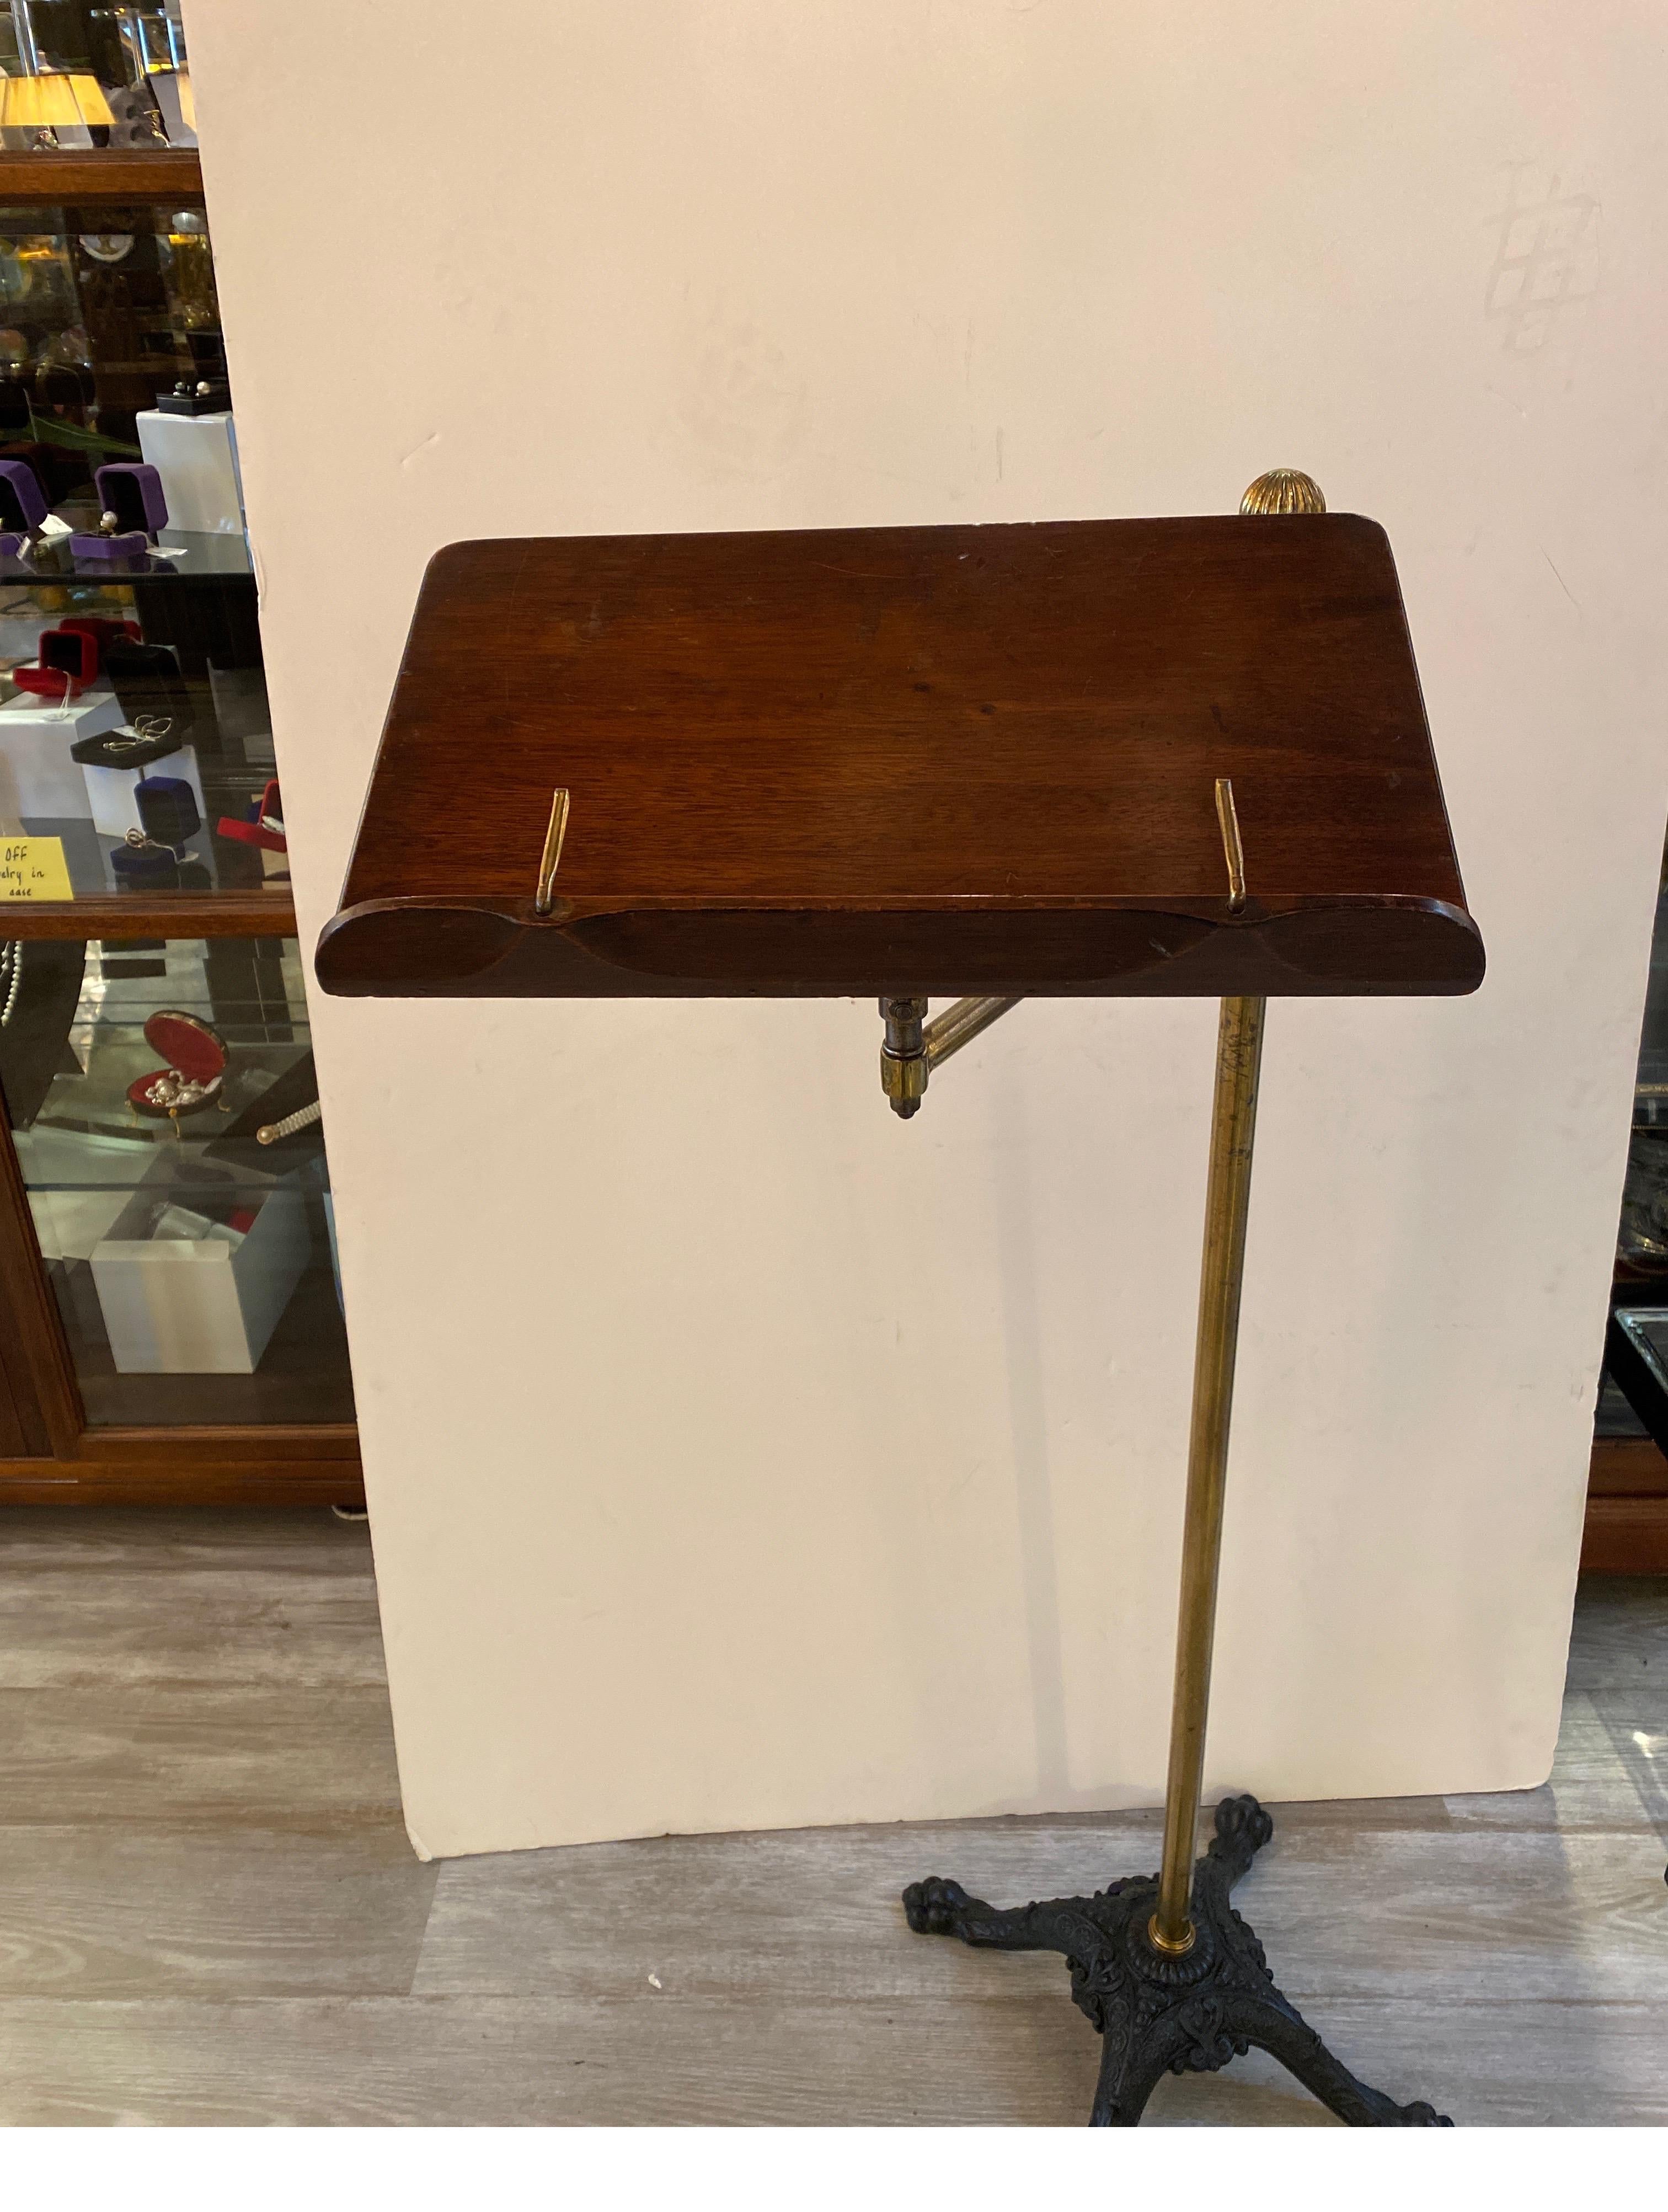 An Antique adjustable Lectern with mahogany shelf attached to a brass pole which is adjustable supported by a cast iron paw foot base.